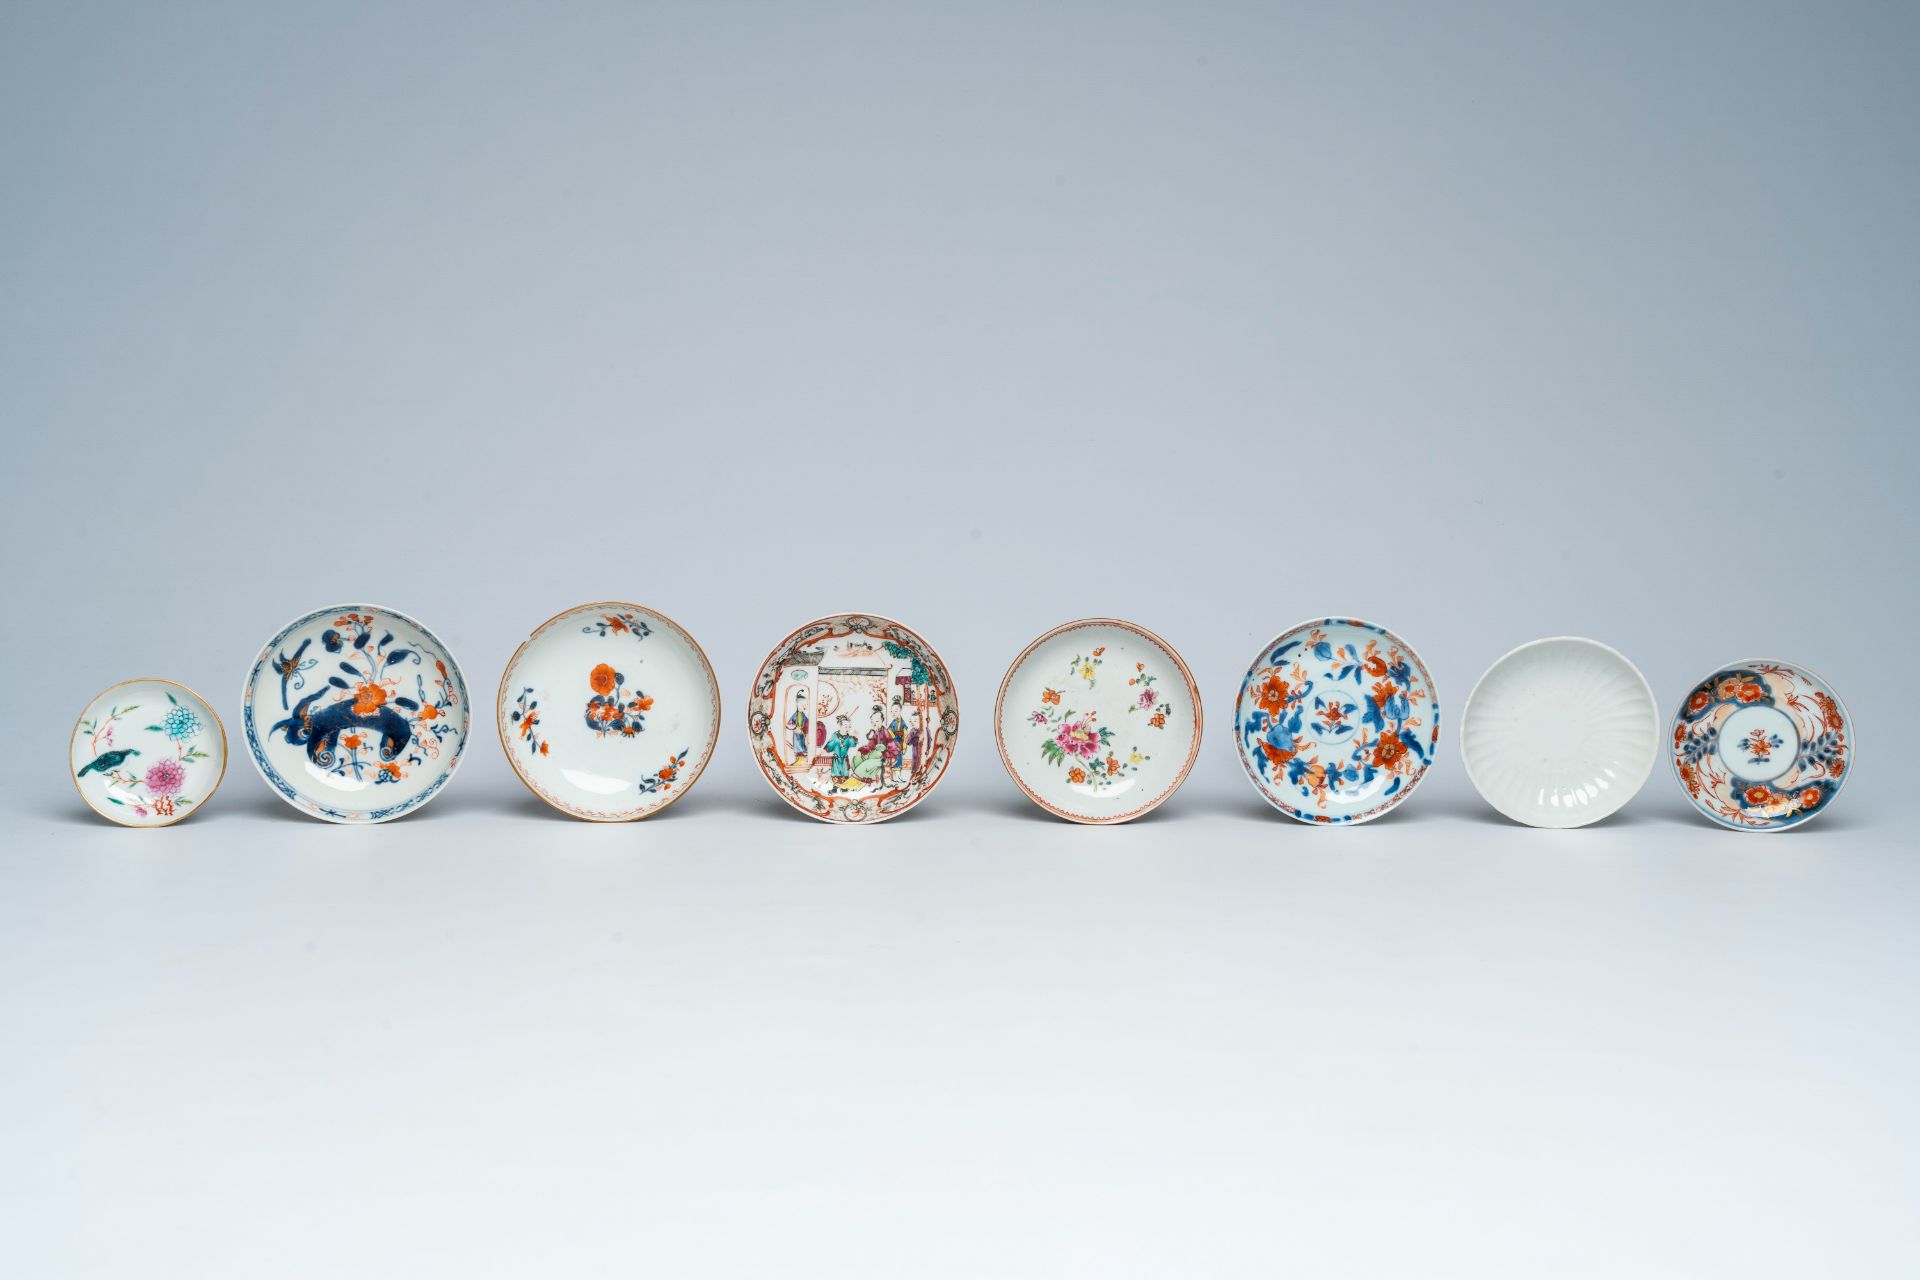 A varied collection of Chinese cups and saucers with various designs, 18th C. and later - Image 10 of 11